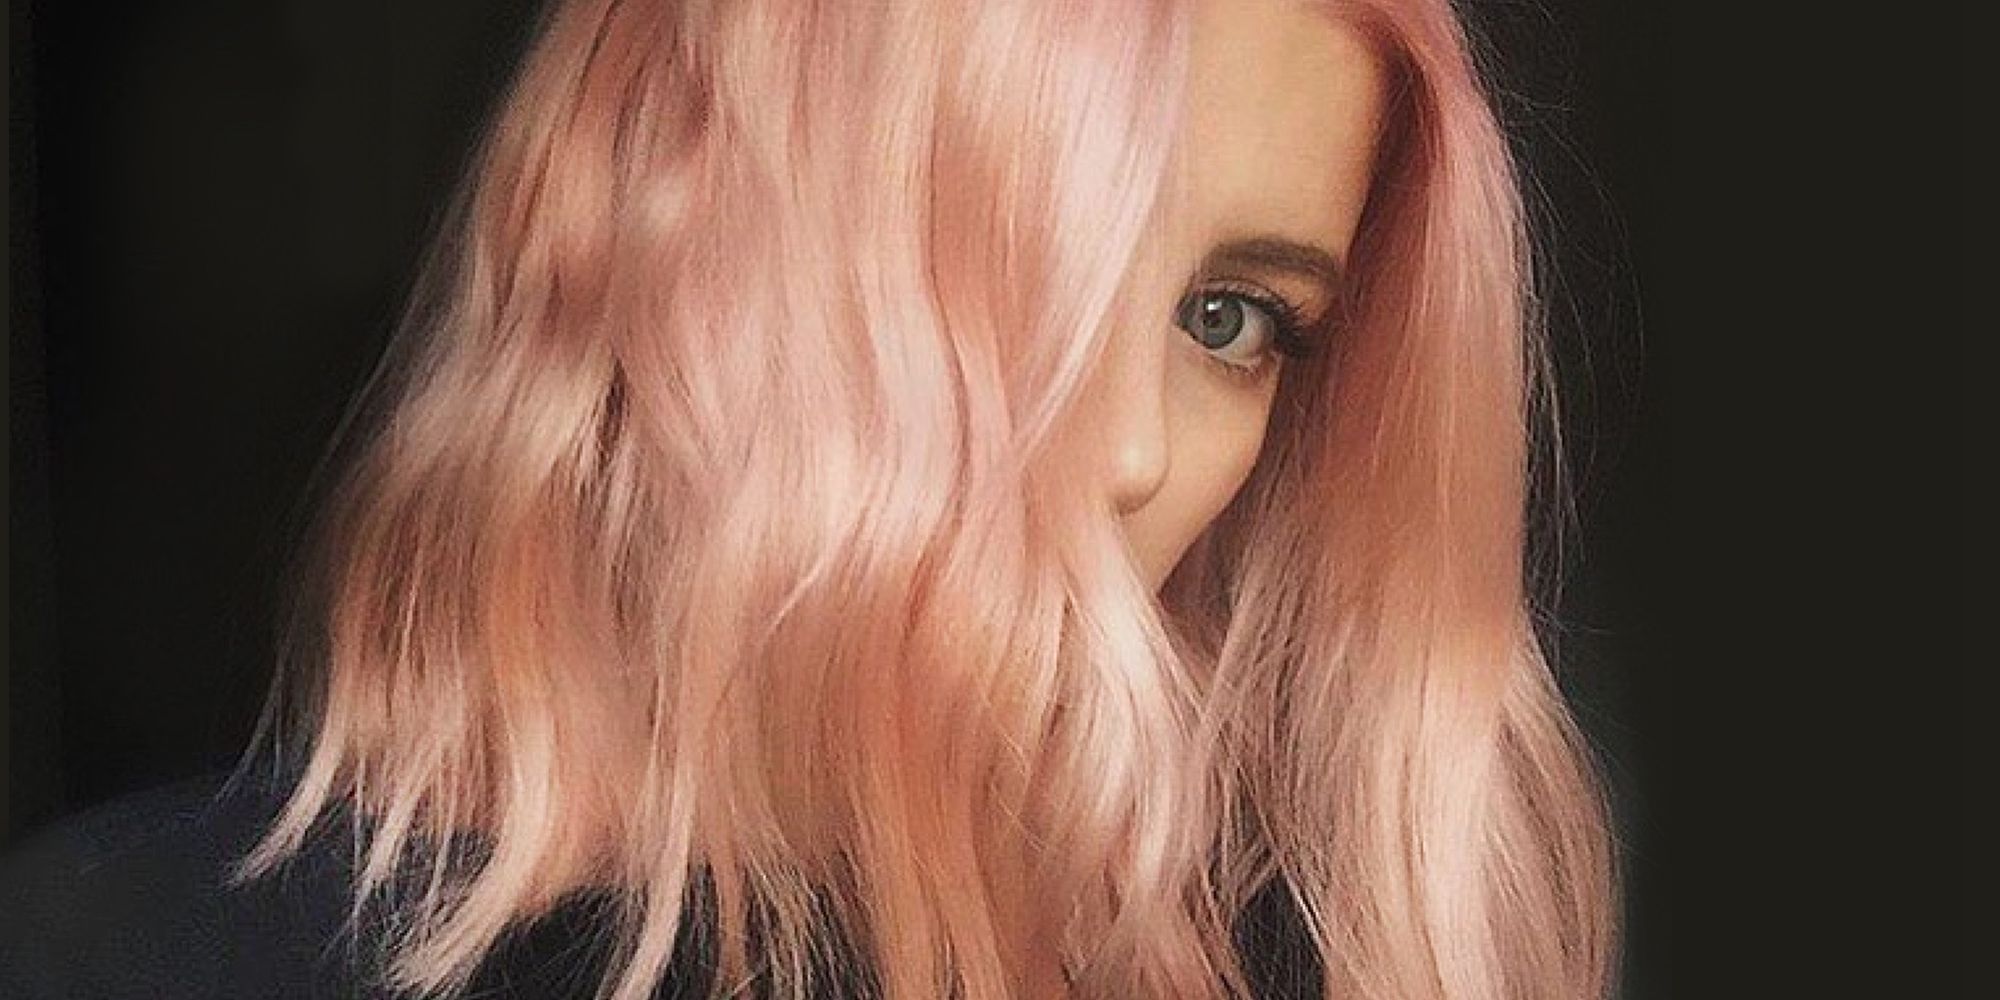 All You Need To Know About Peach Hair | Wella Professionals